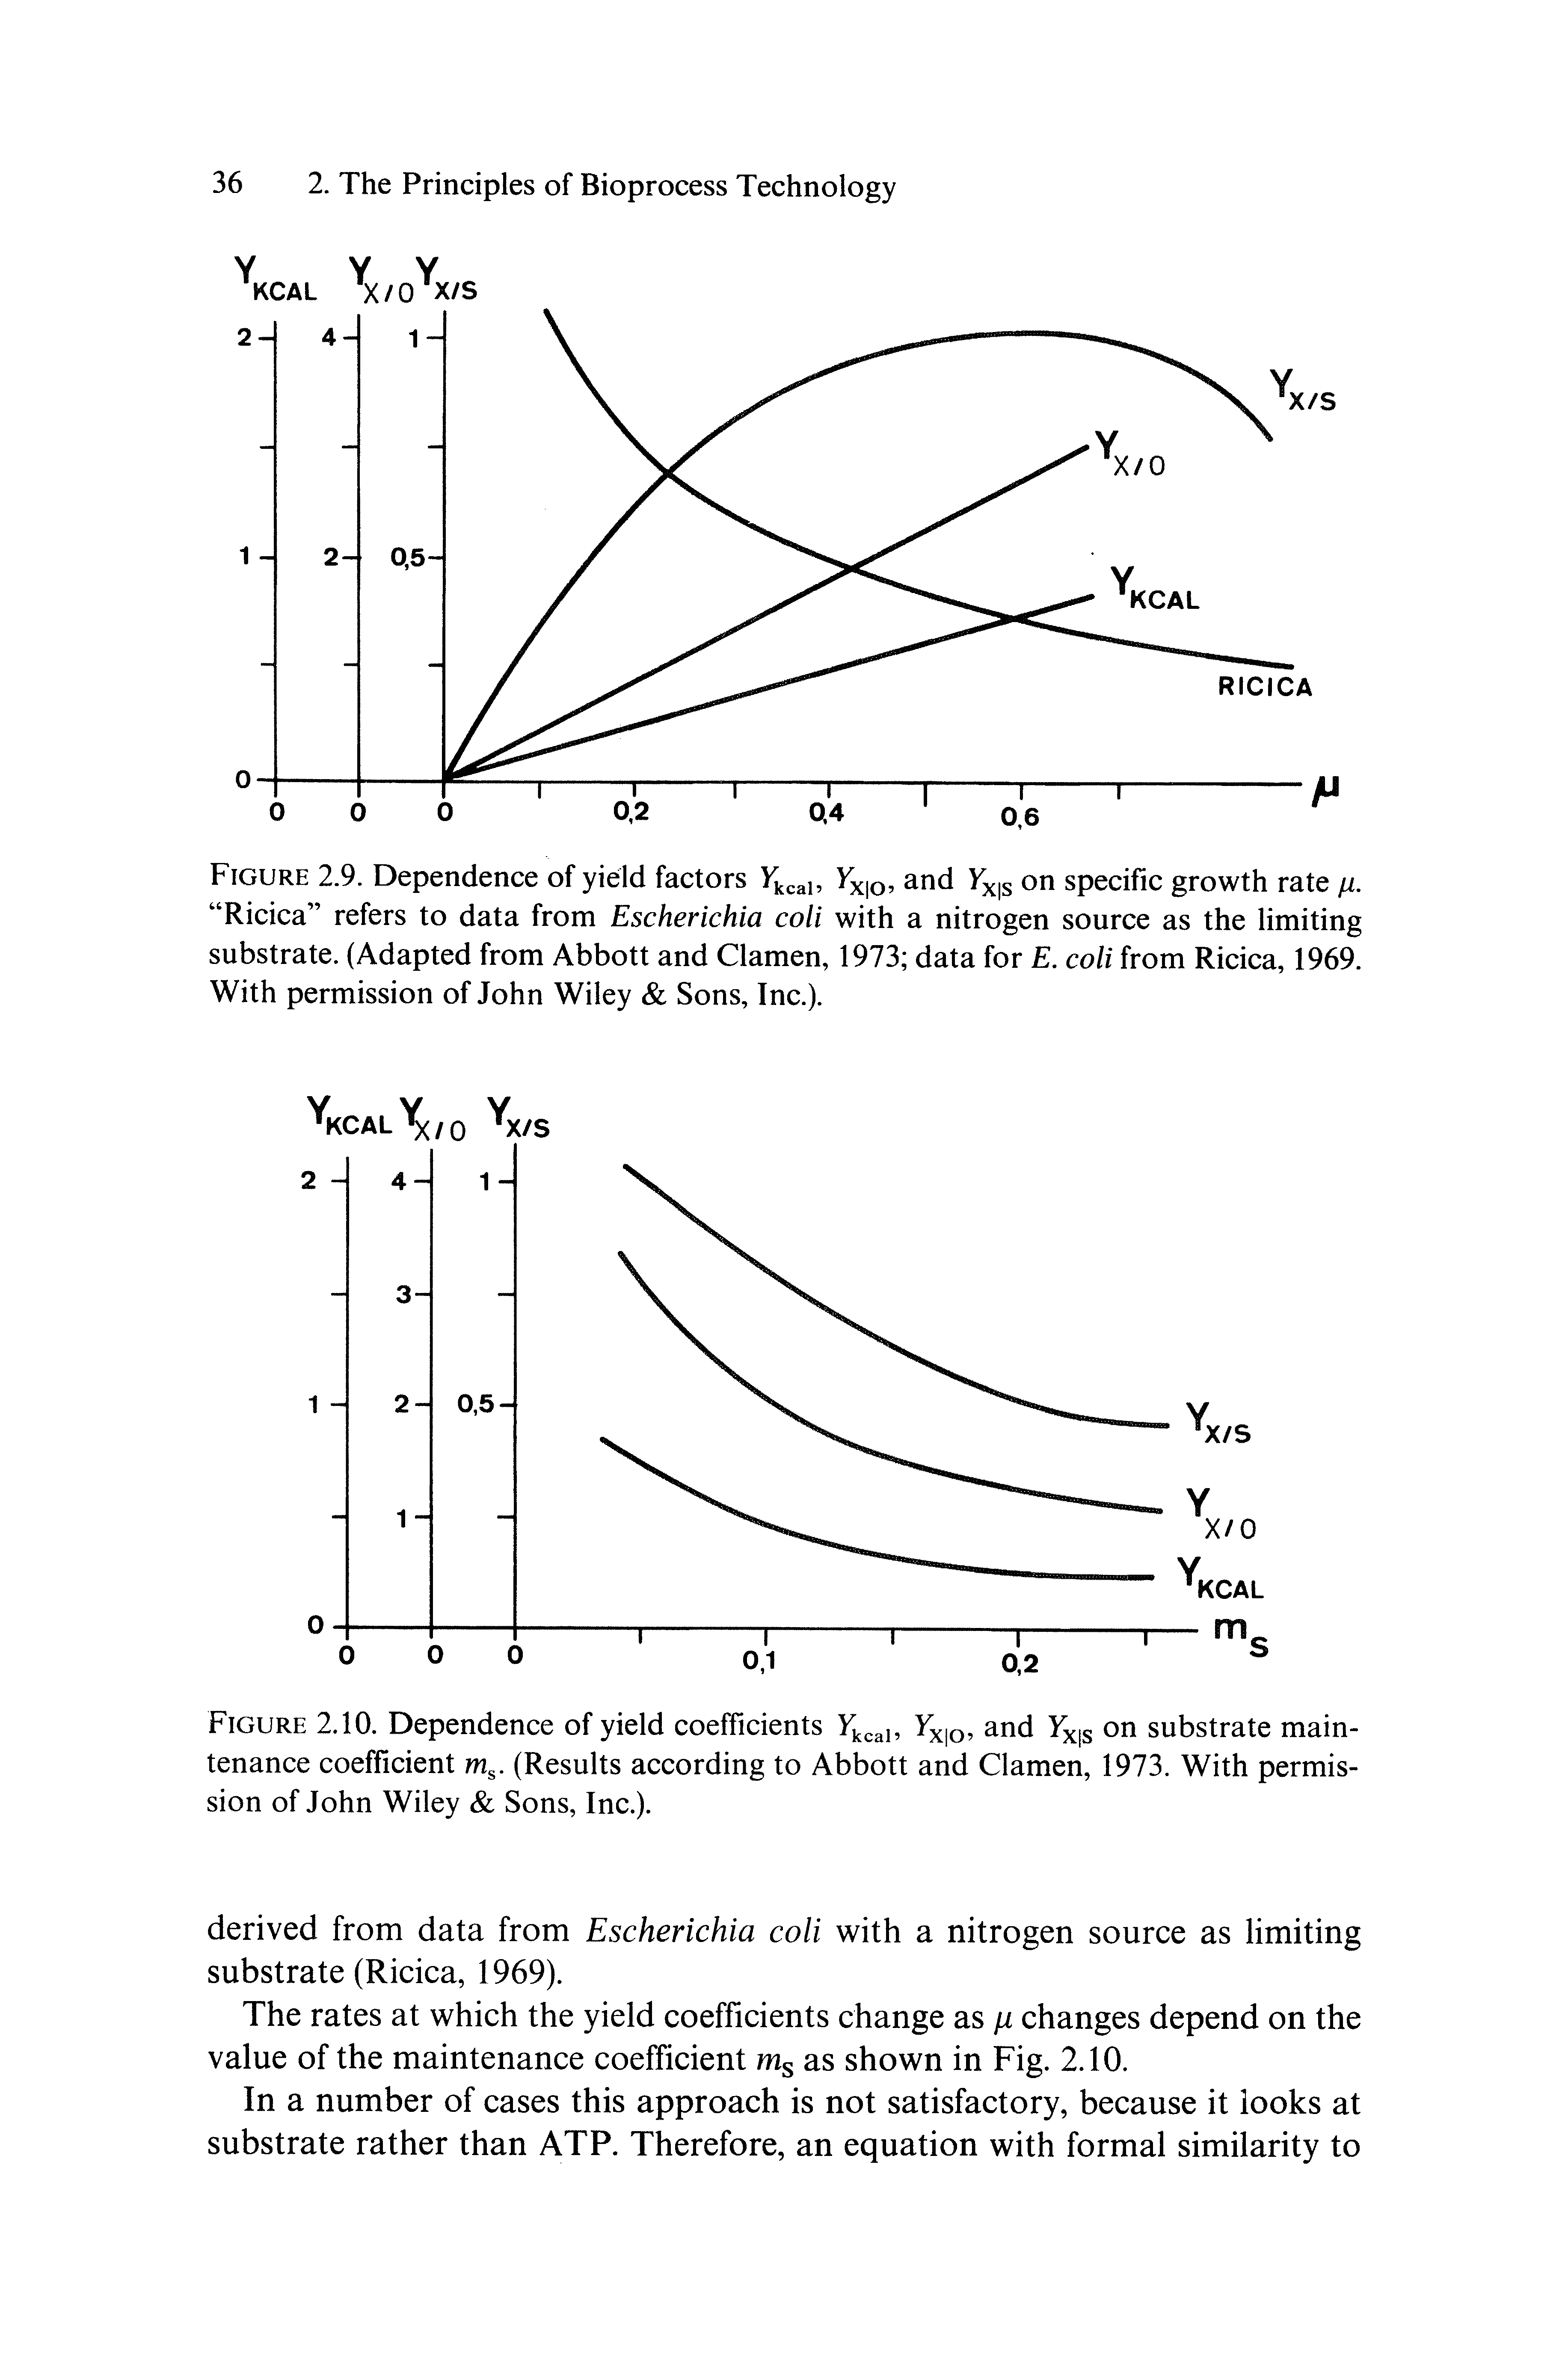 Figure 2.9. Dependence of yield factors >xio nd Tx s specific growth rate fx. Ricica refers to data from Escherichia coli with a nitrogen source as the limiting substrate. (Adapted from Abbott and Clamen, 1973 data for E. coli from Ricica, 1969. With permission of John Wiley Sons, Inc.).